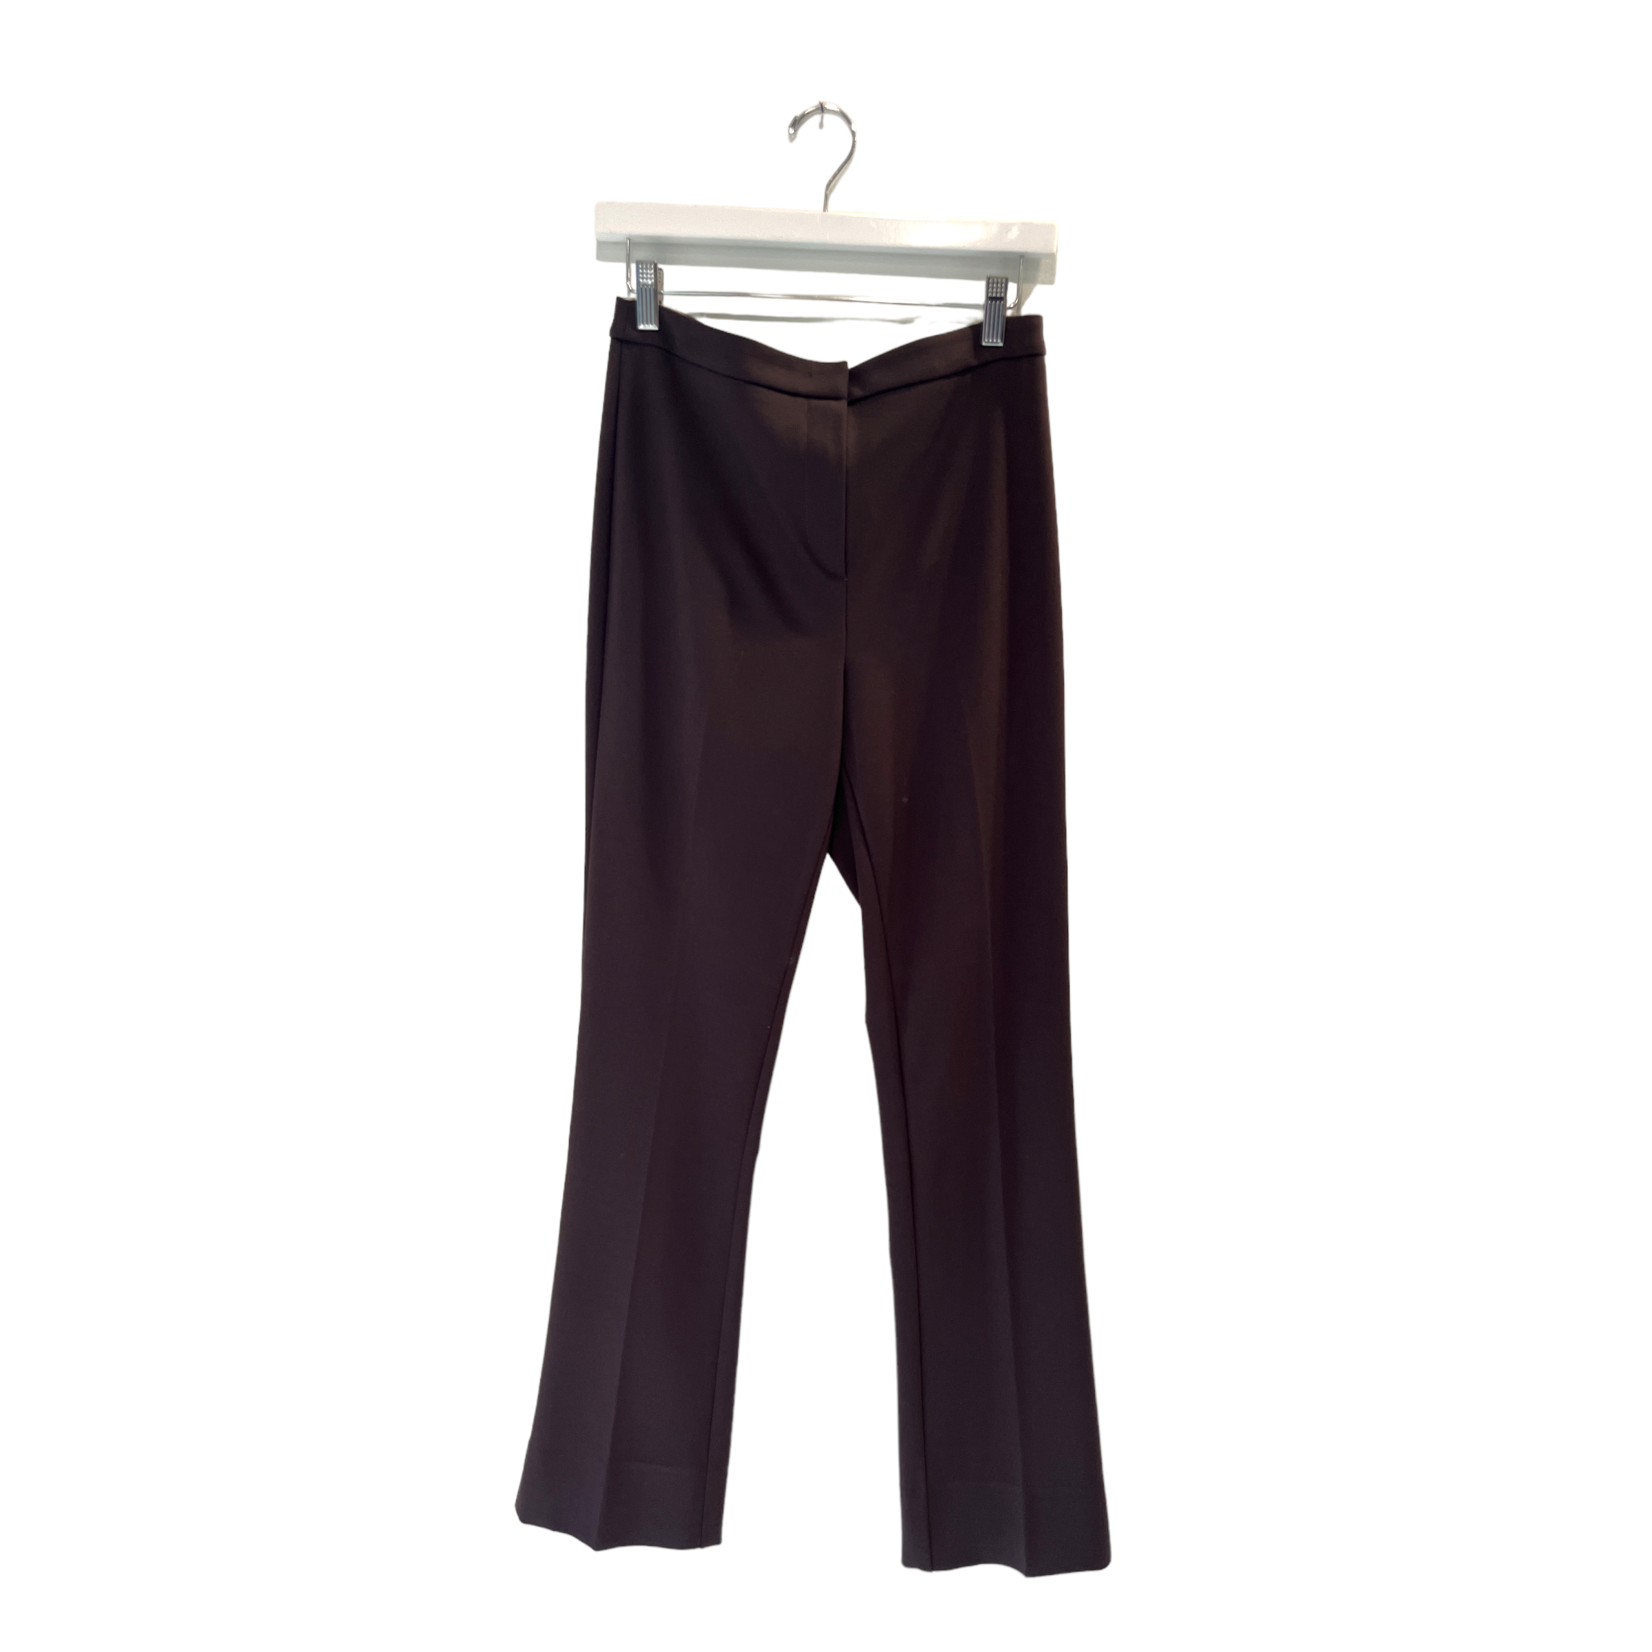 Beatrice Fitted Trouser w/ Flared Bottom